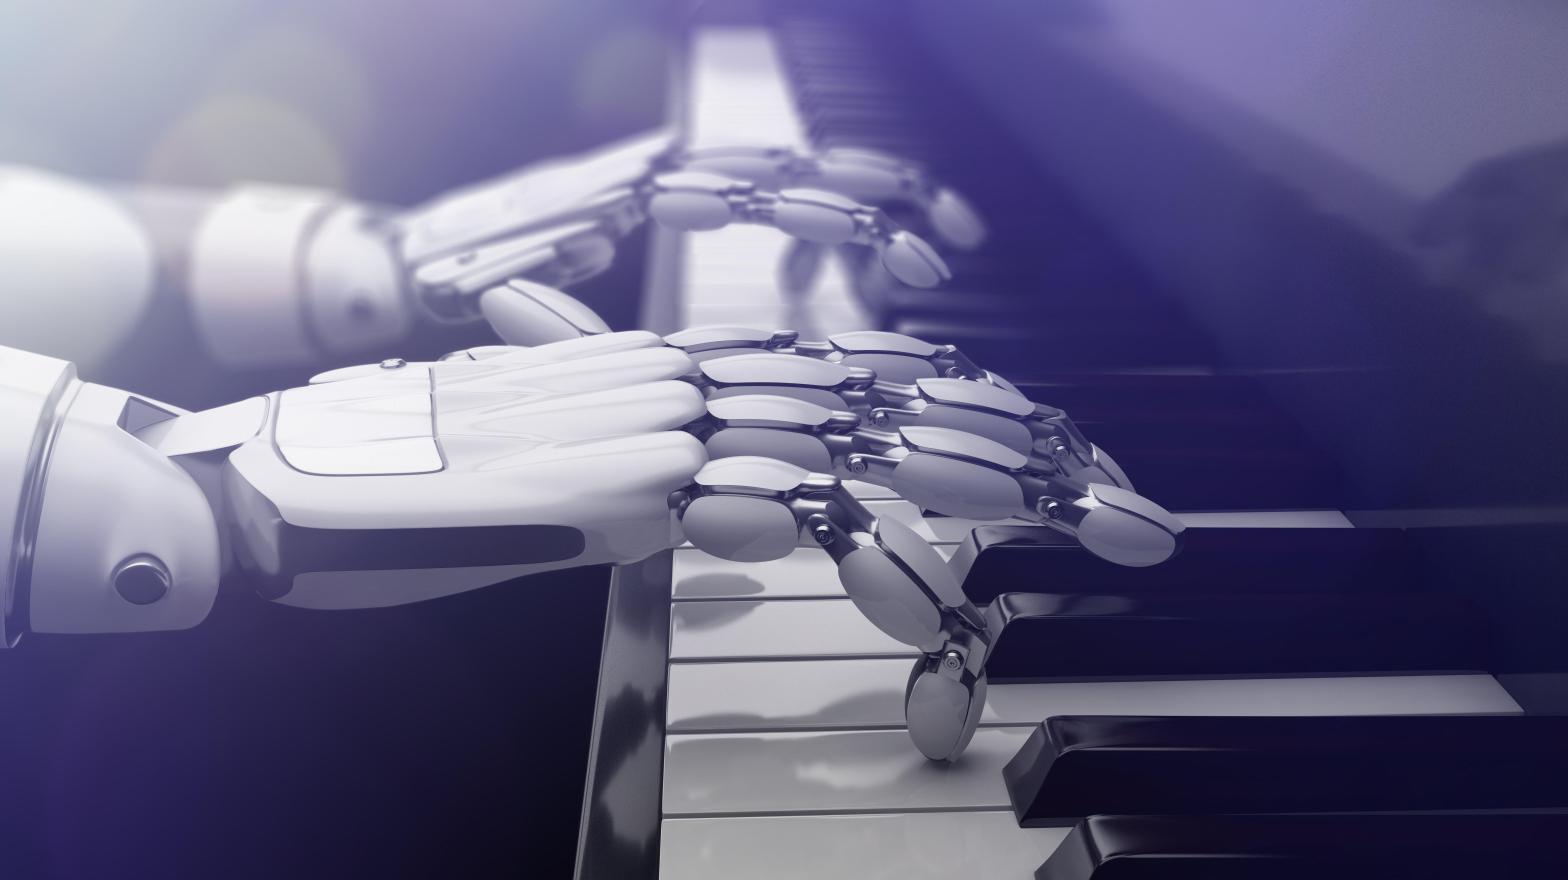 Meta's MusicGen AI can't do vocals, but generative artificial intelligence is getting much closer to fully creating manufactured music. (Image: Iaremenko Sergii, Shutterstock)